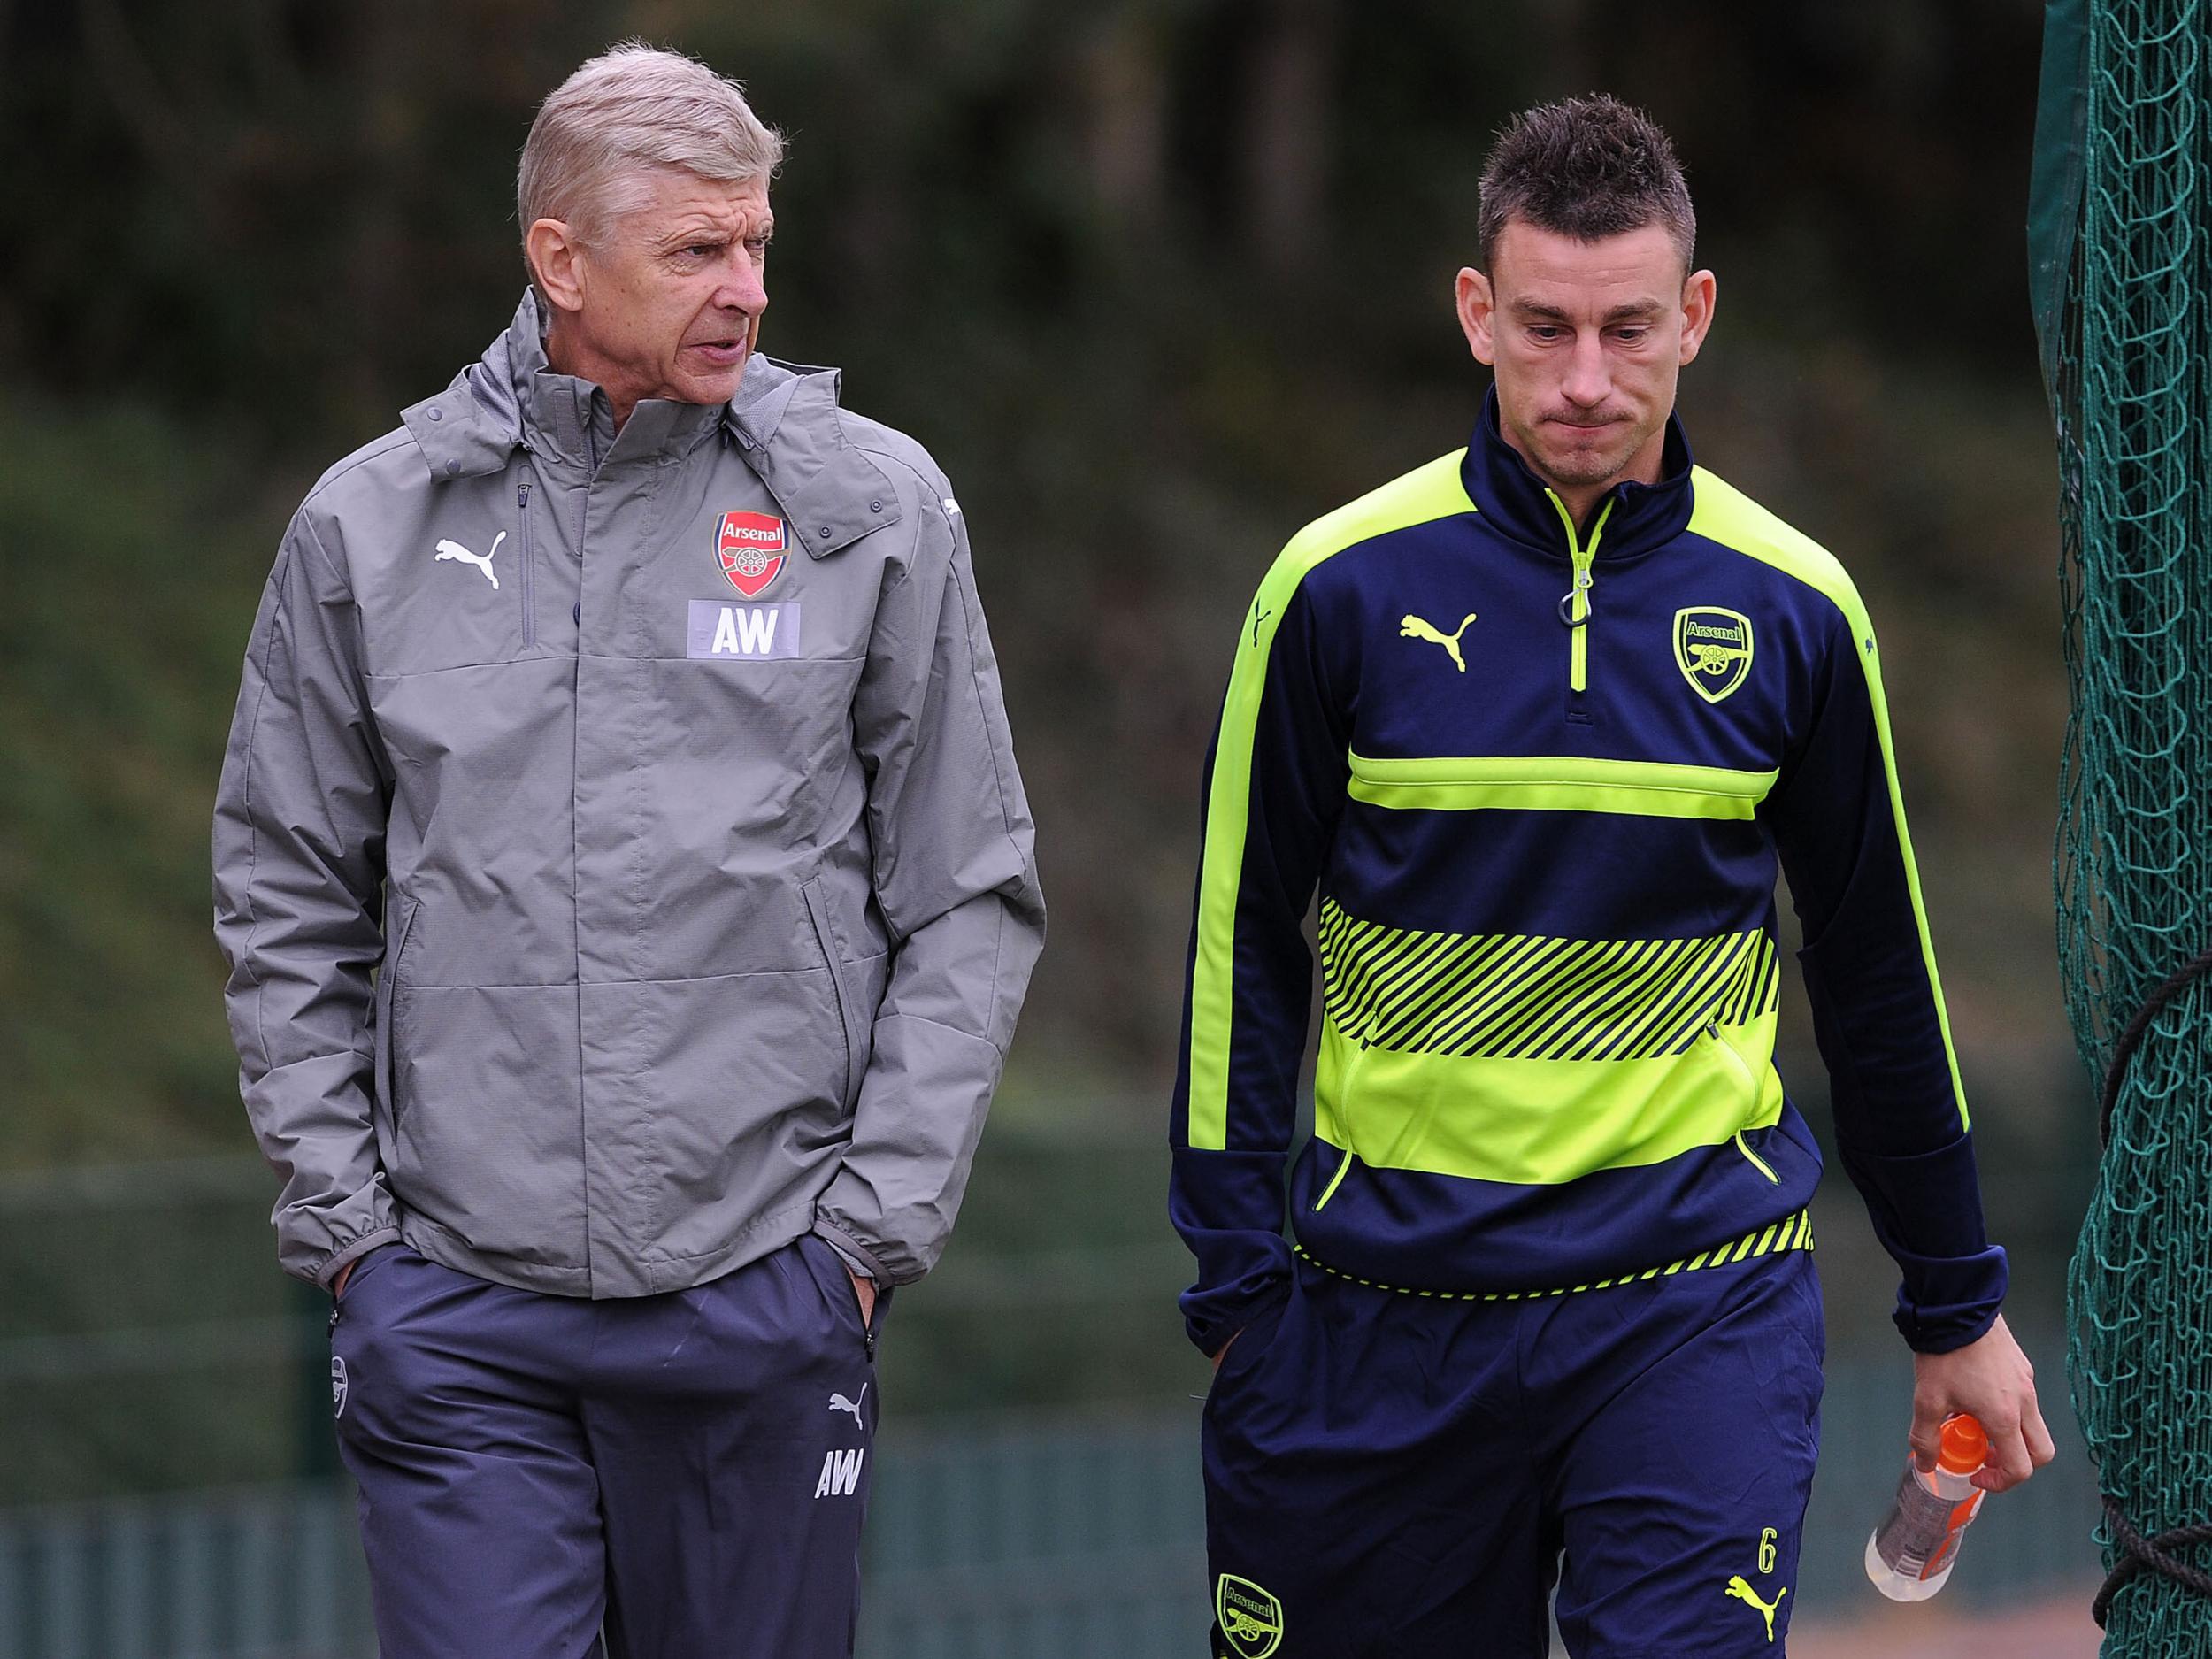 Koscielny is far too important for Arsenal to lose